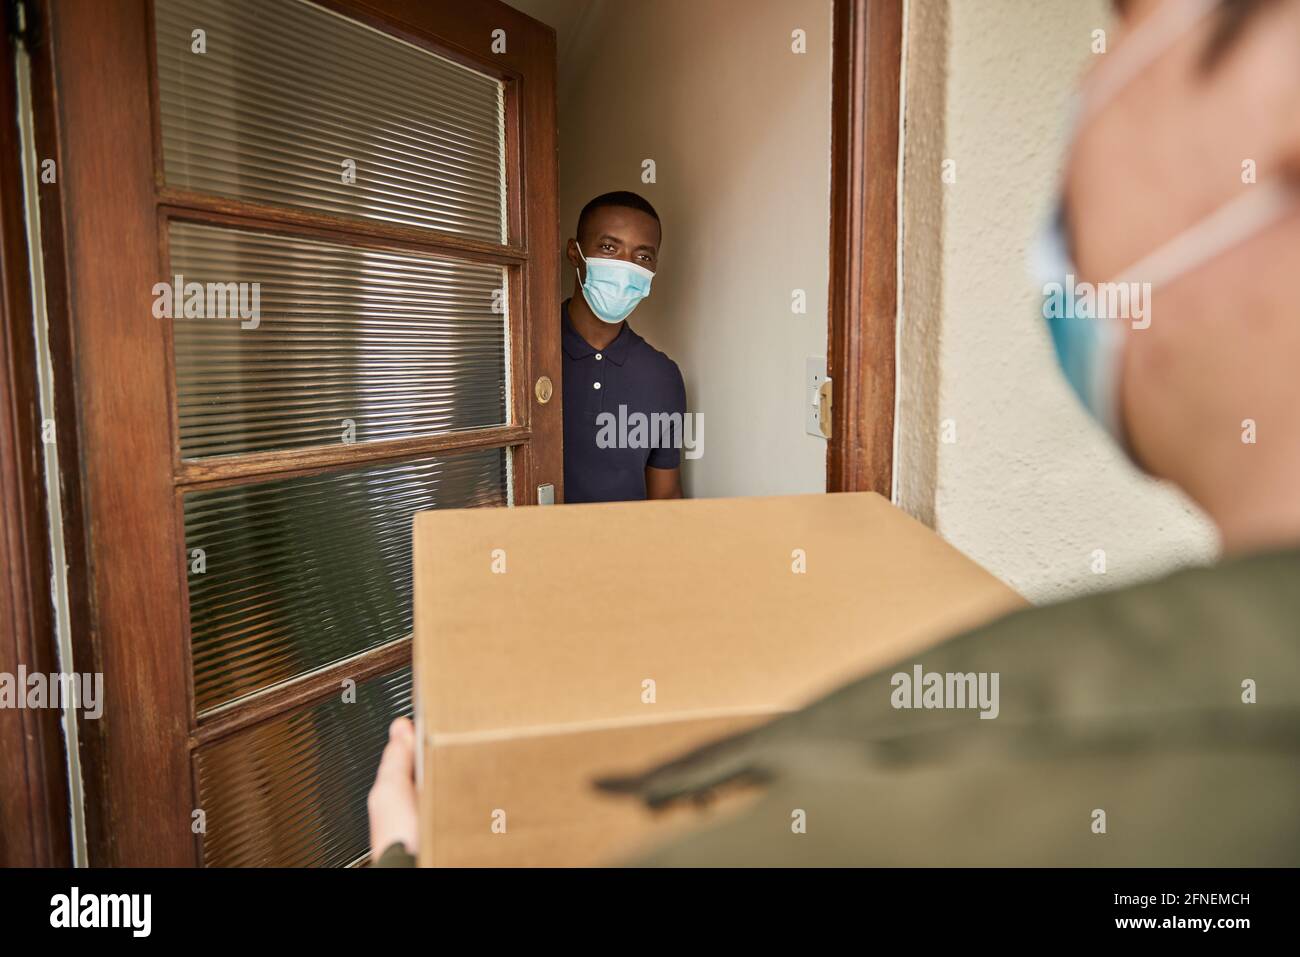 African man in a mask receiving a courier package at home Stock Photo